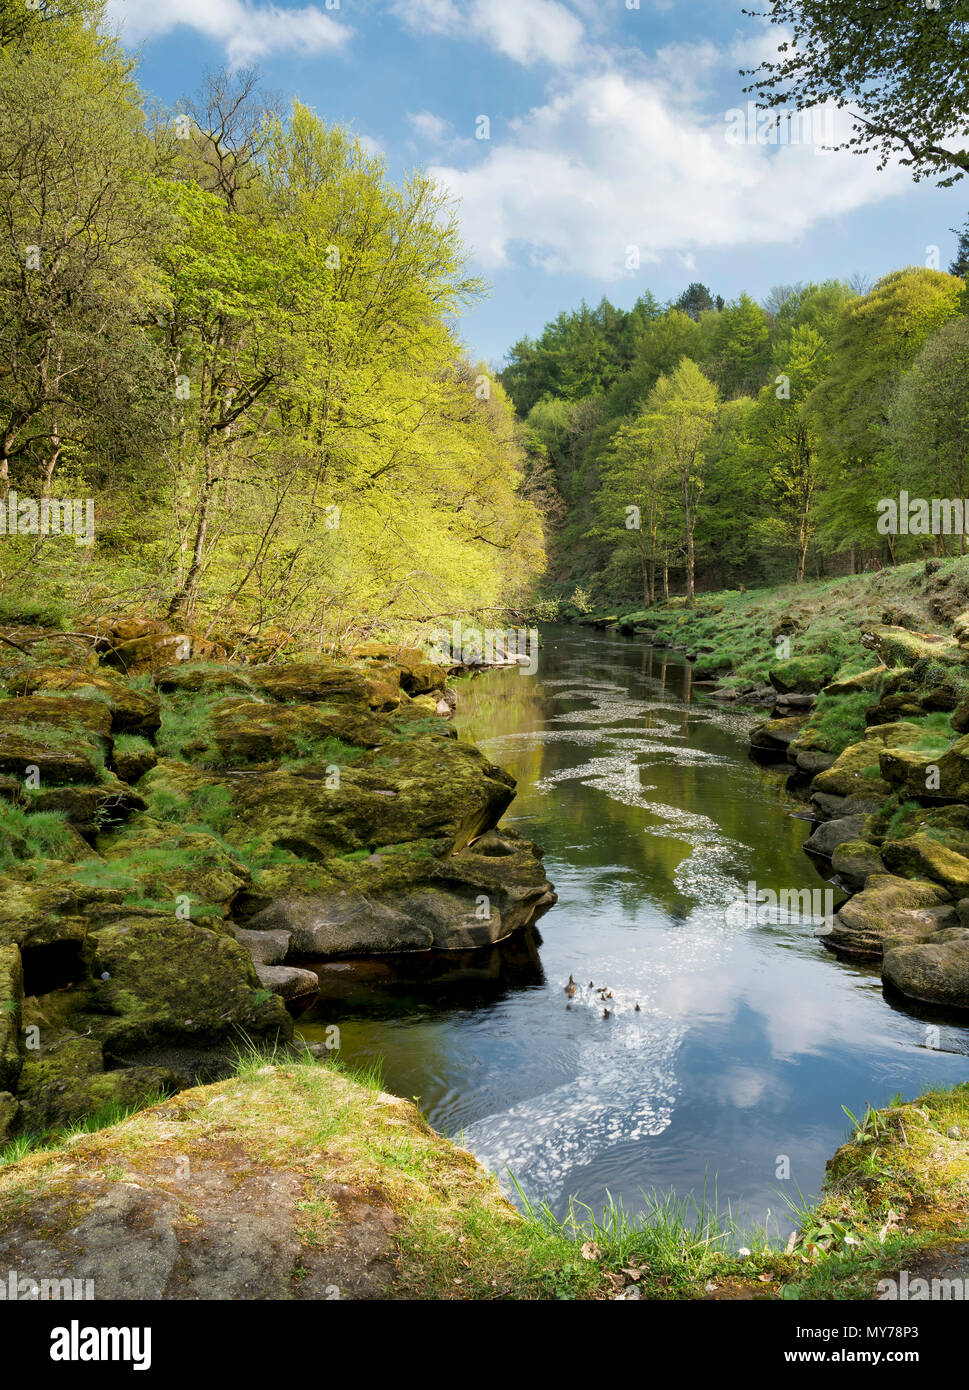 The River Wharfe narrows as it passes through the Strid just north from Bolton Abbey on the Cavendish Estate in Lower Wharfedale. Stock Photo